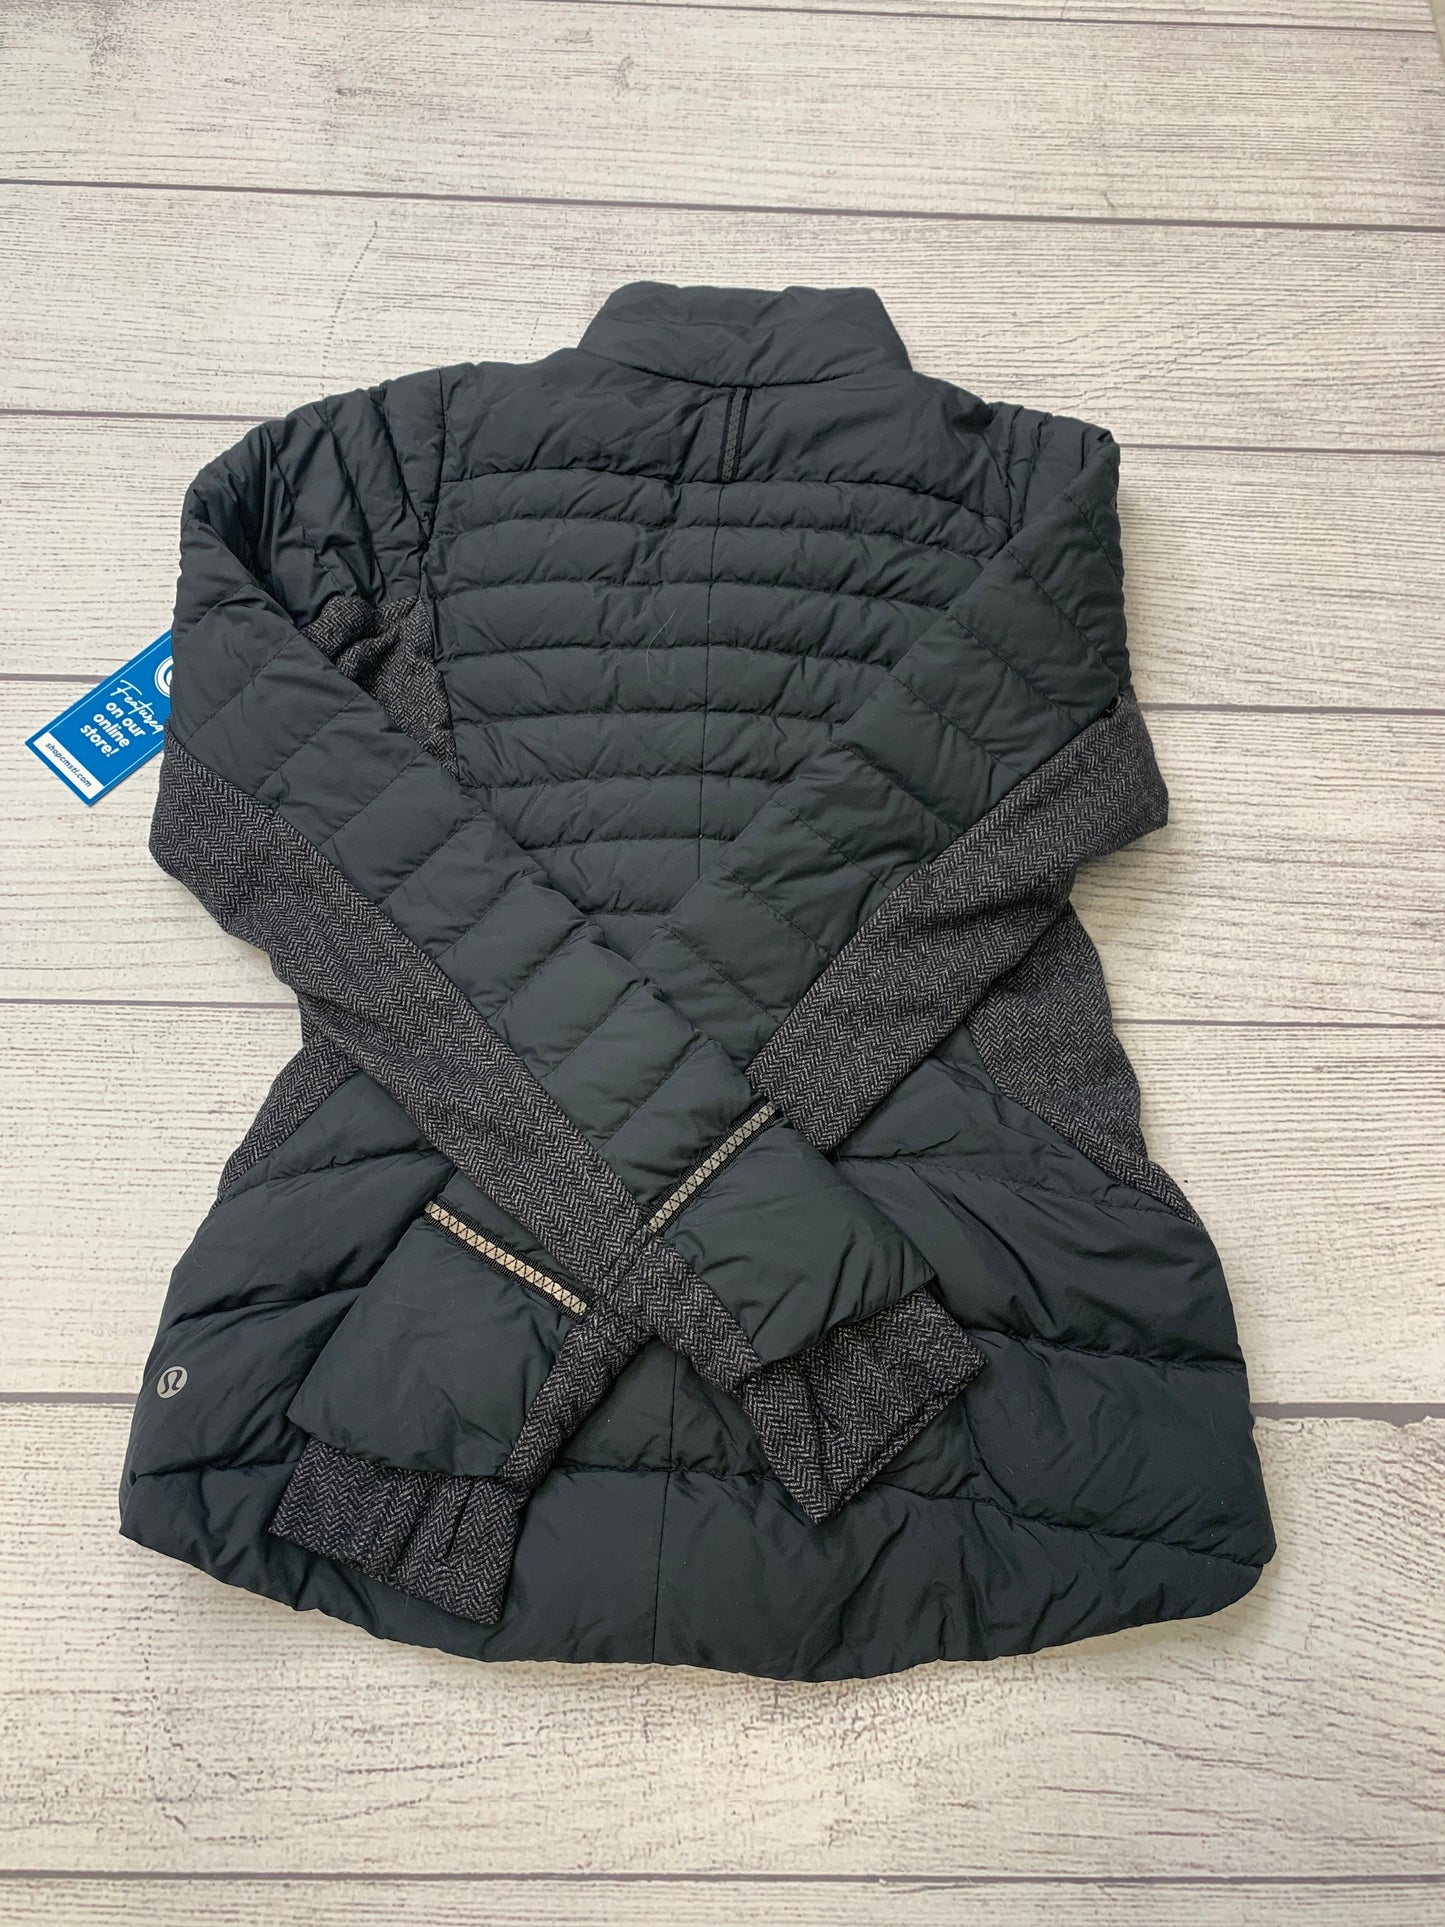 Grey Coat Puffer & Quilted Lululemon, Size 6